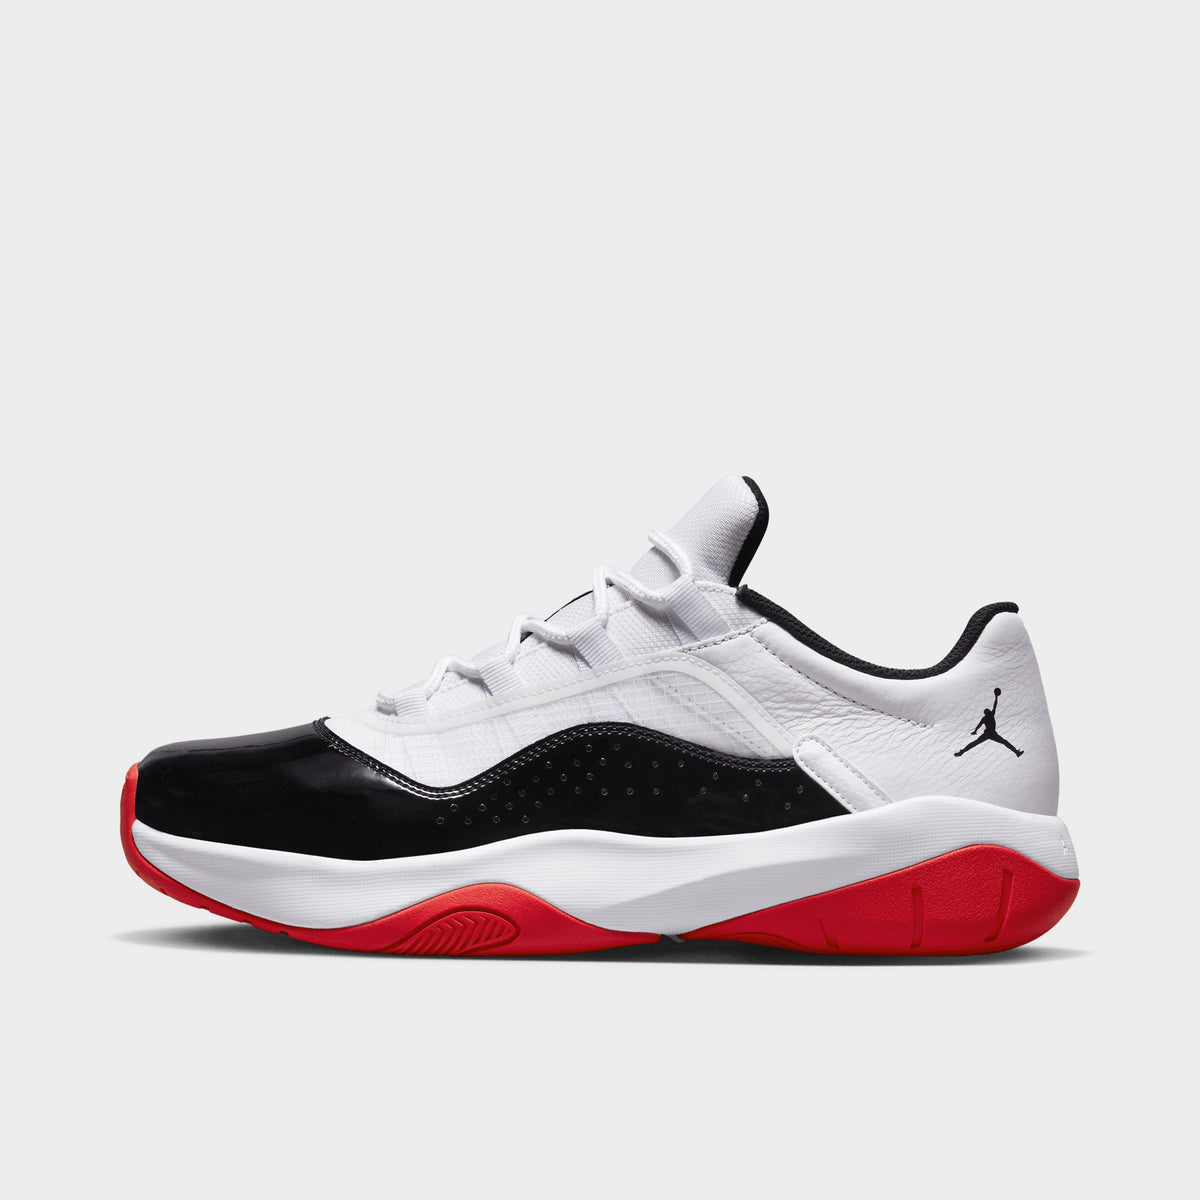 jordan 11 black and white and red